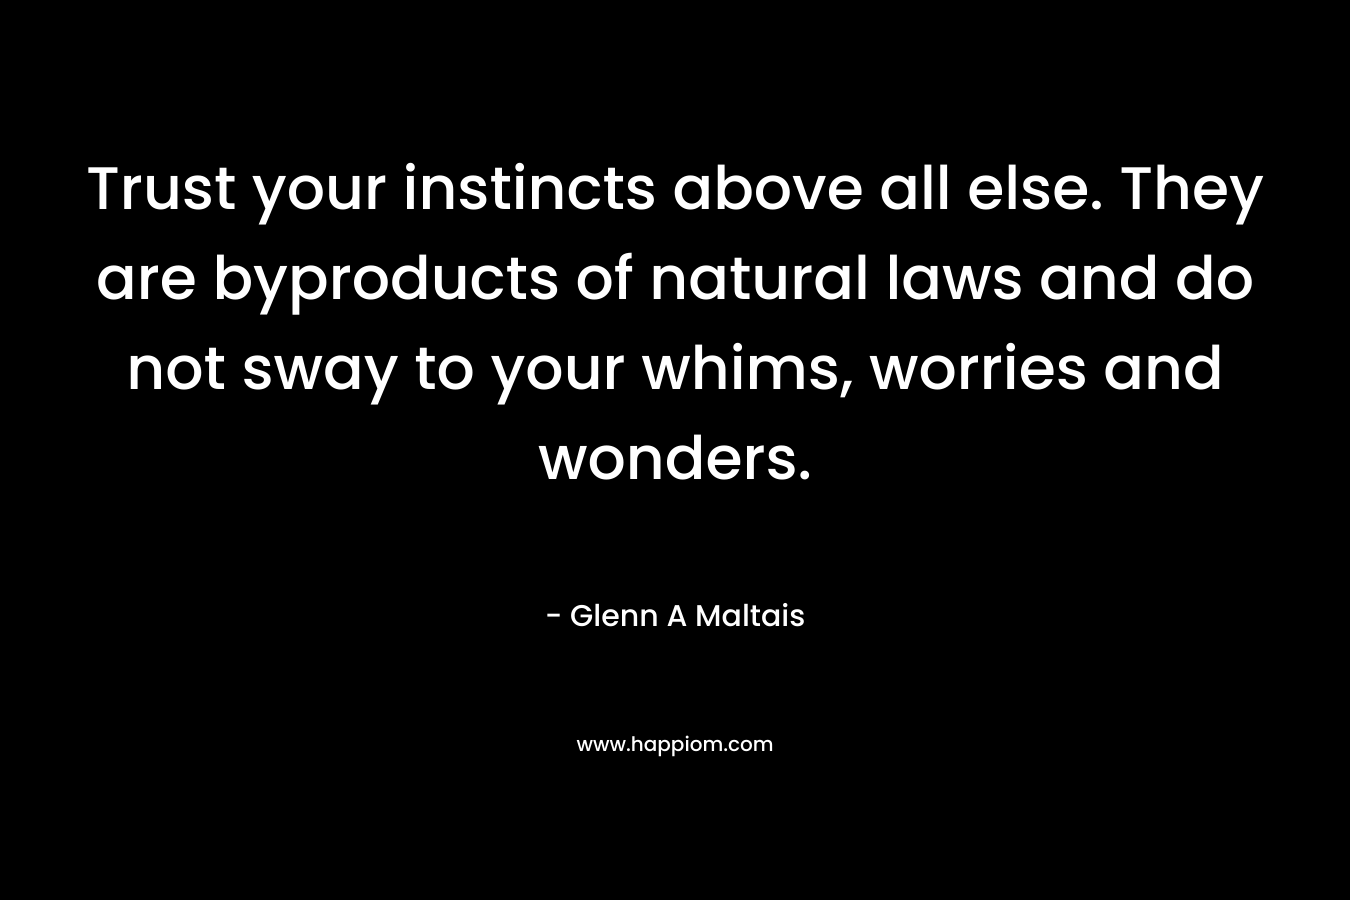 Trust your instincts above all else. They are byproducts of natural laws and do not sway to your whims, worries and wonders. – Glenn A Maltais